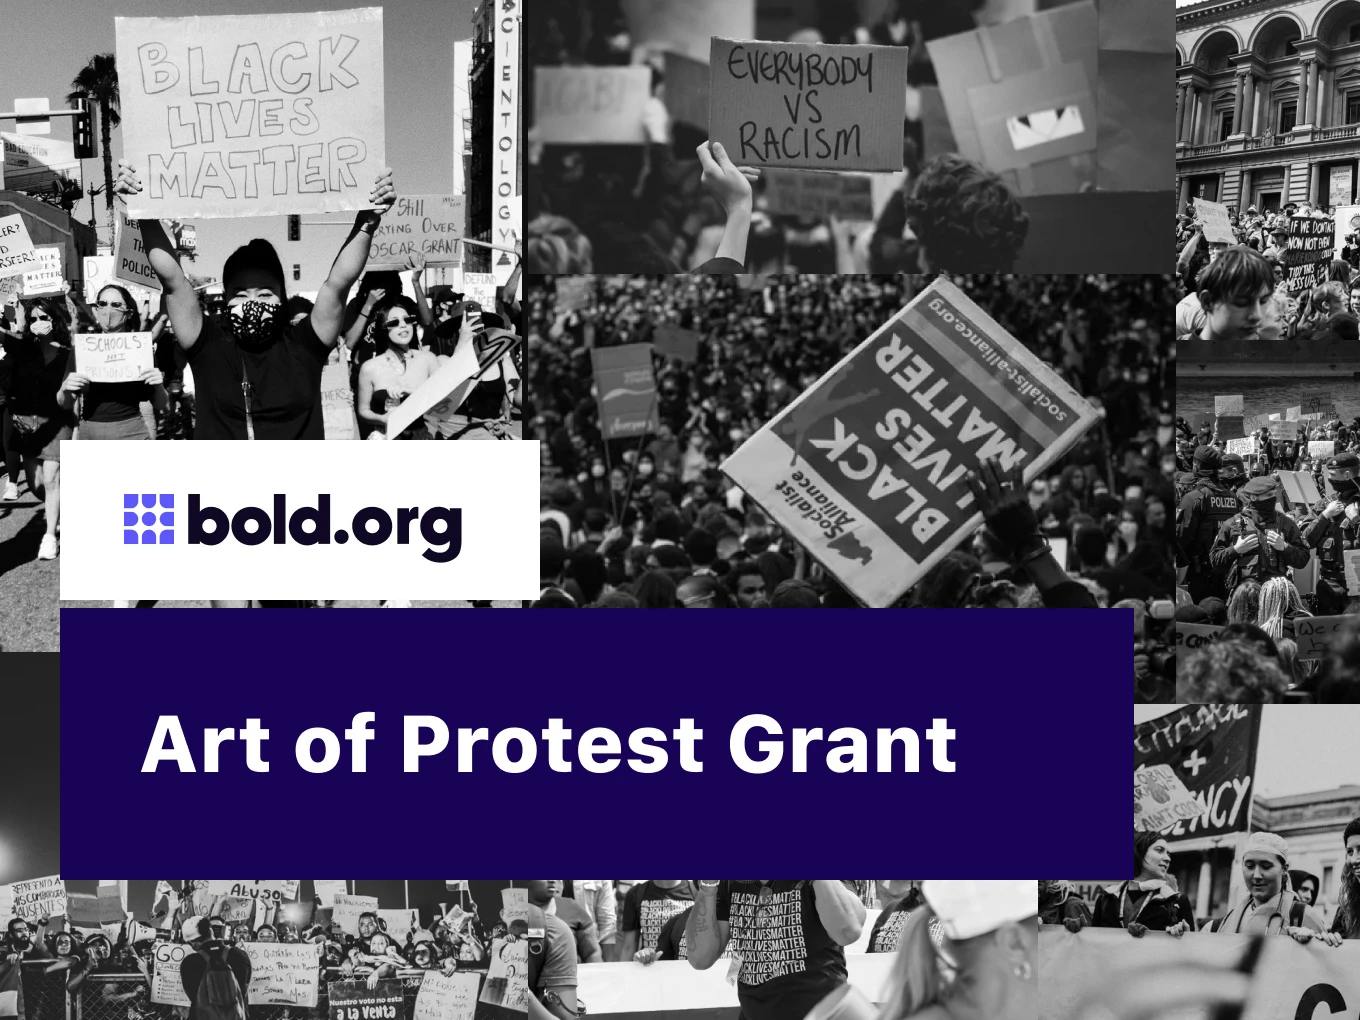 Art of Protest Grant for Black Students